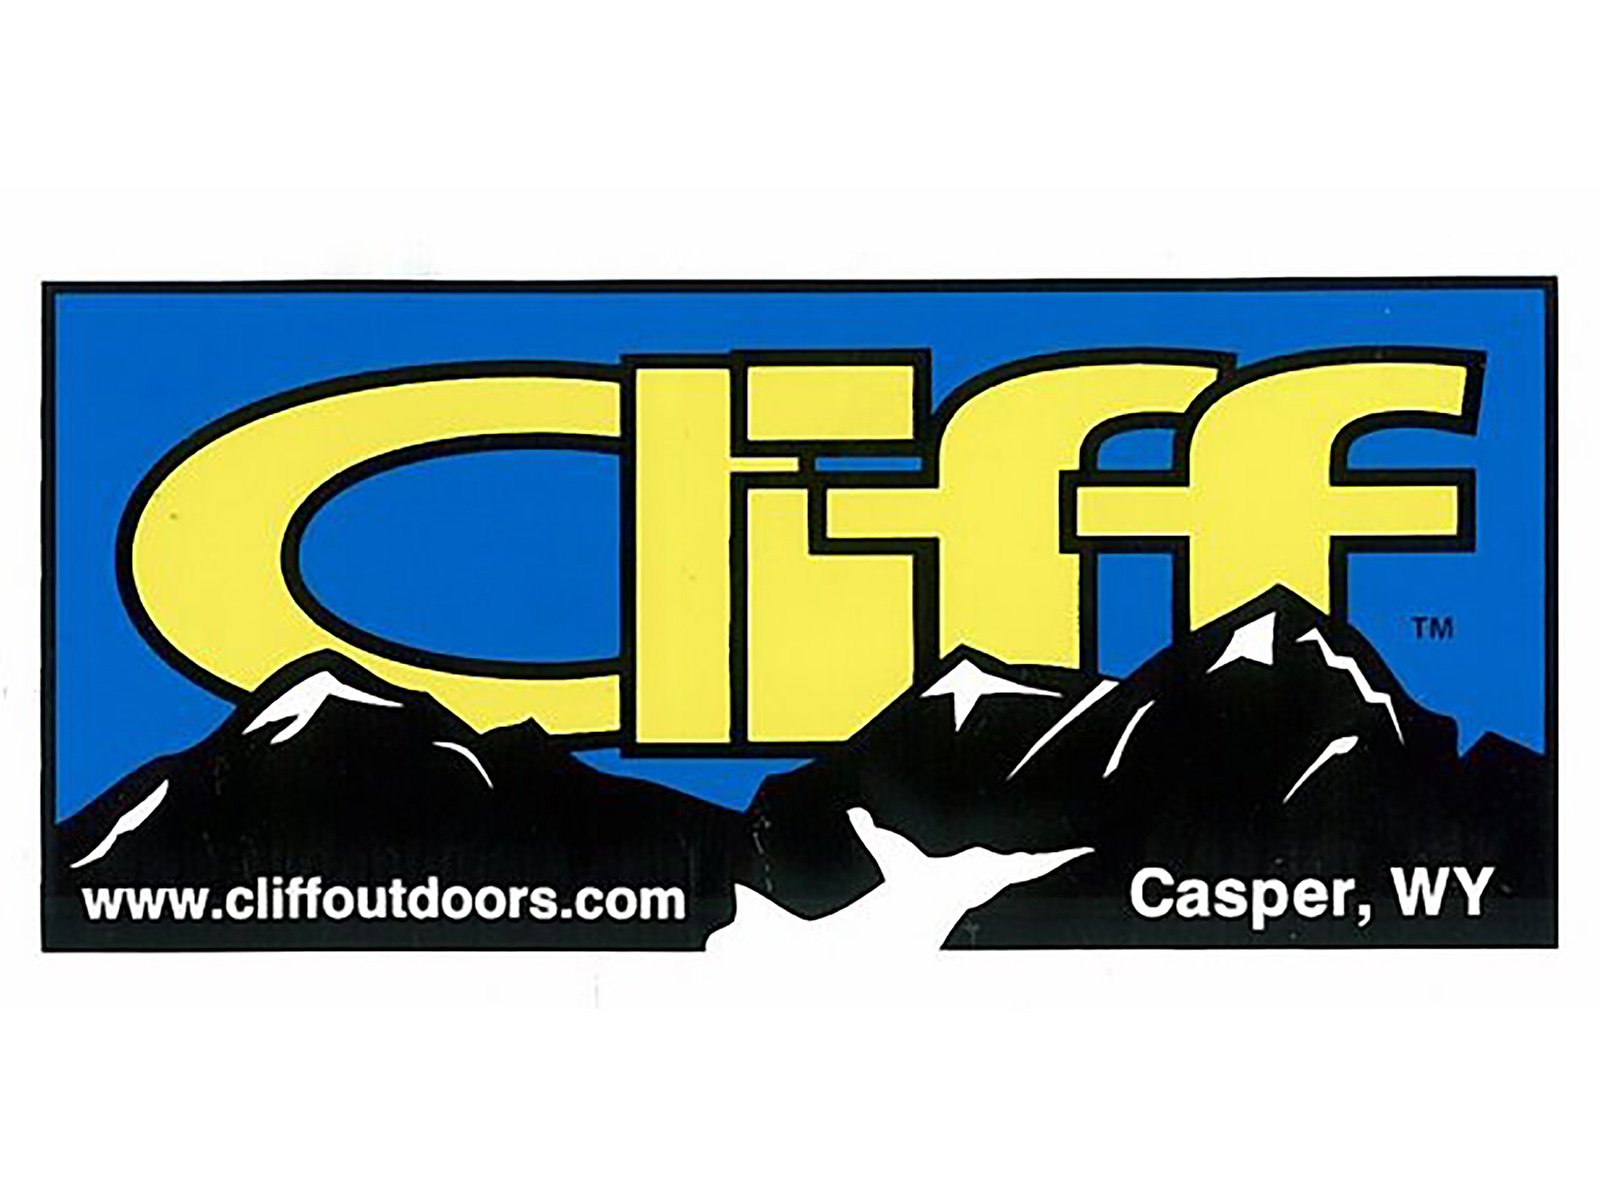 CLIFF OUTDOORS